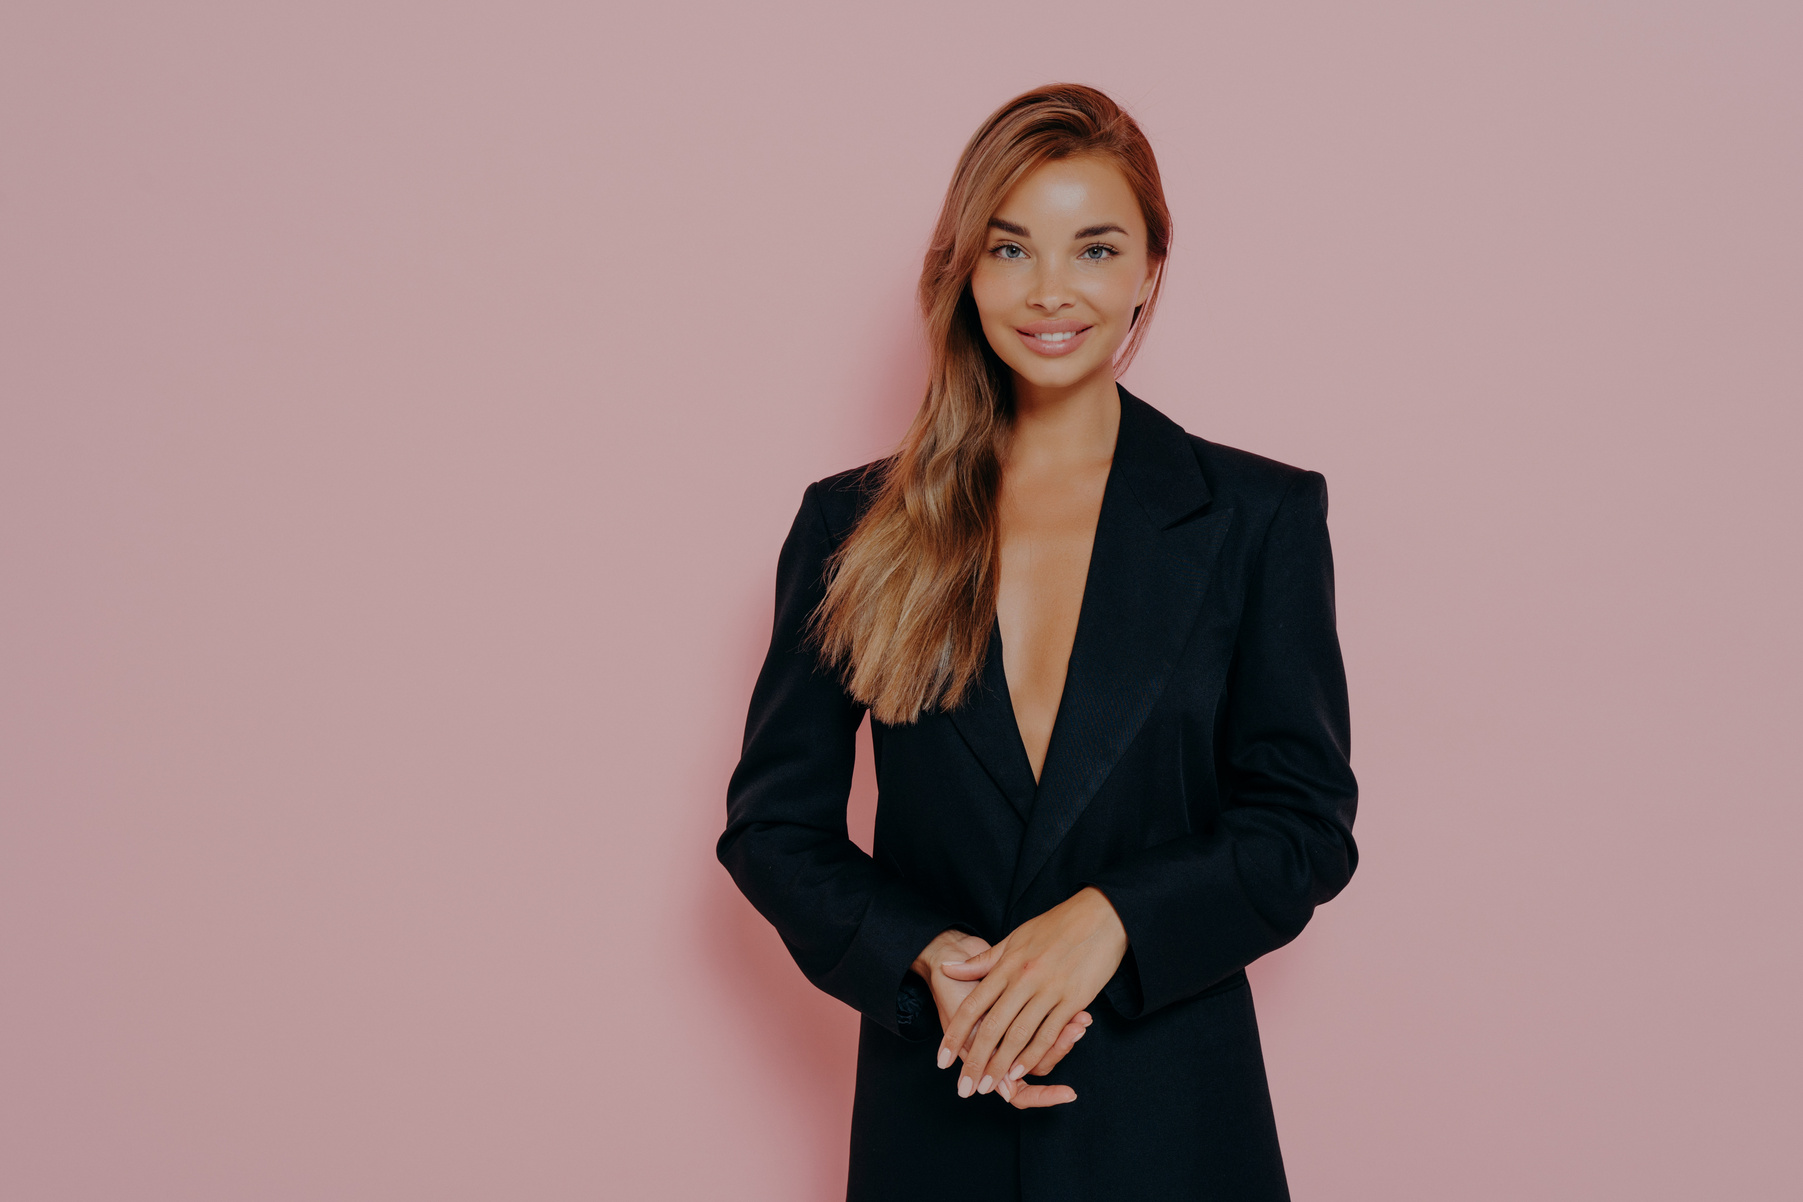 Confident boss lady smiling on pink background